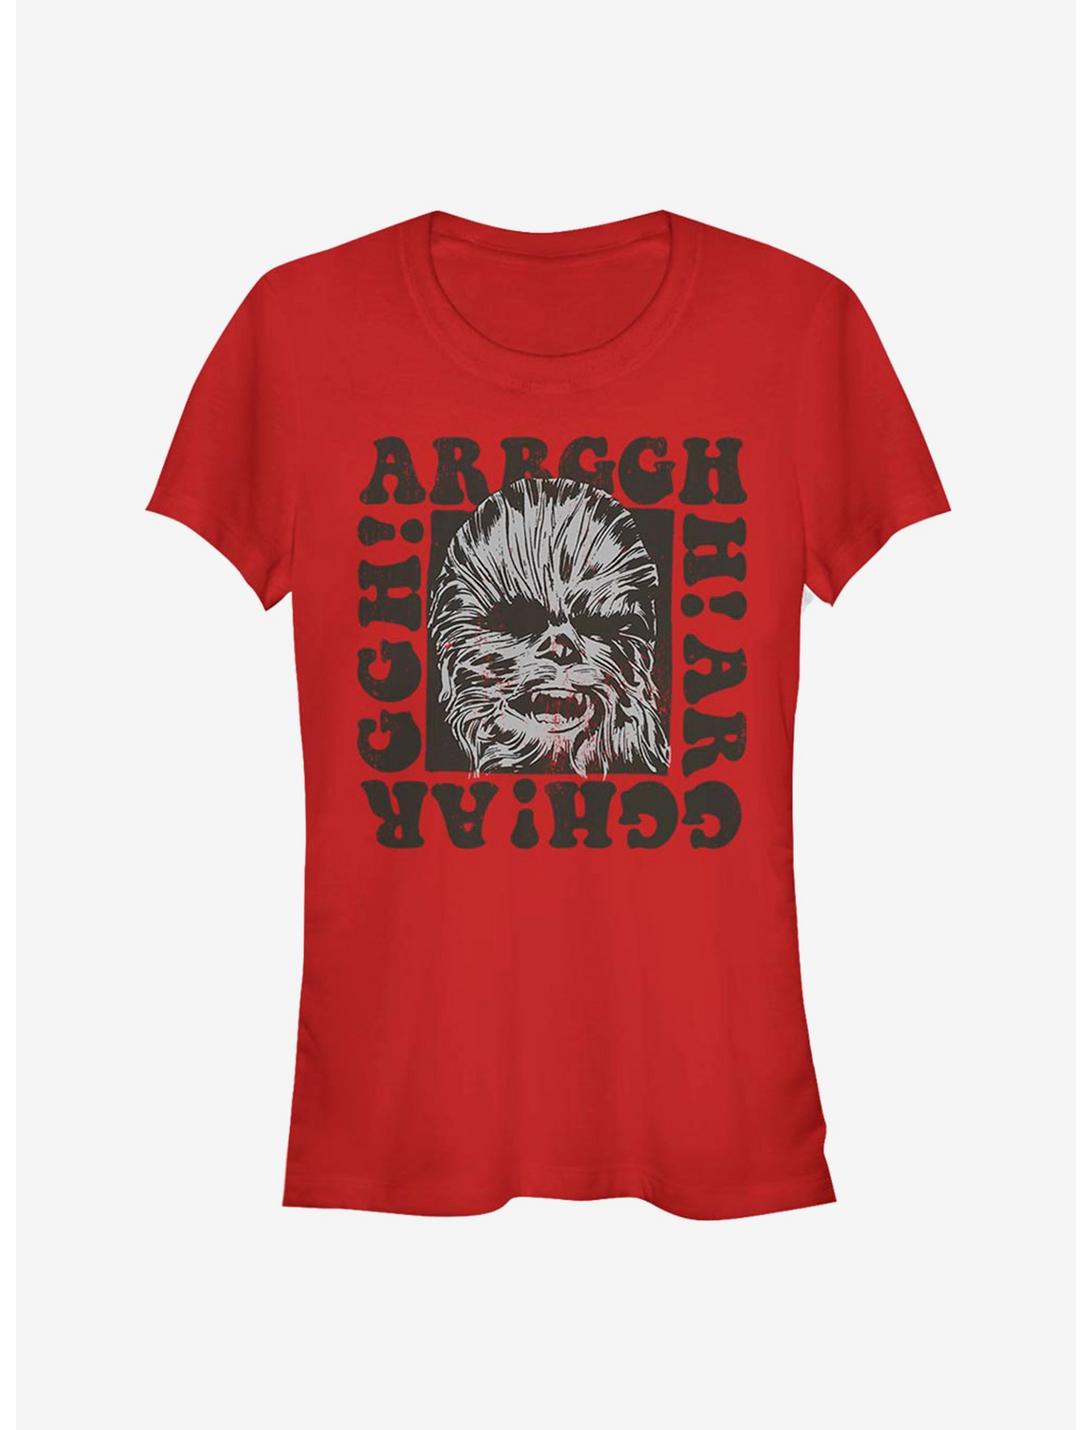 Star Wars Chewie Groove Solid  Girls T-Shirt, RED, hi-res